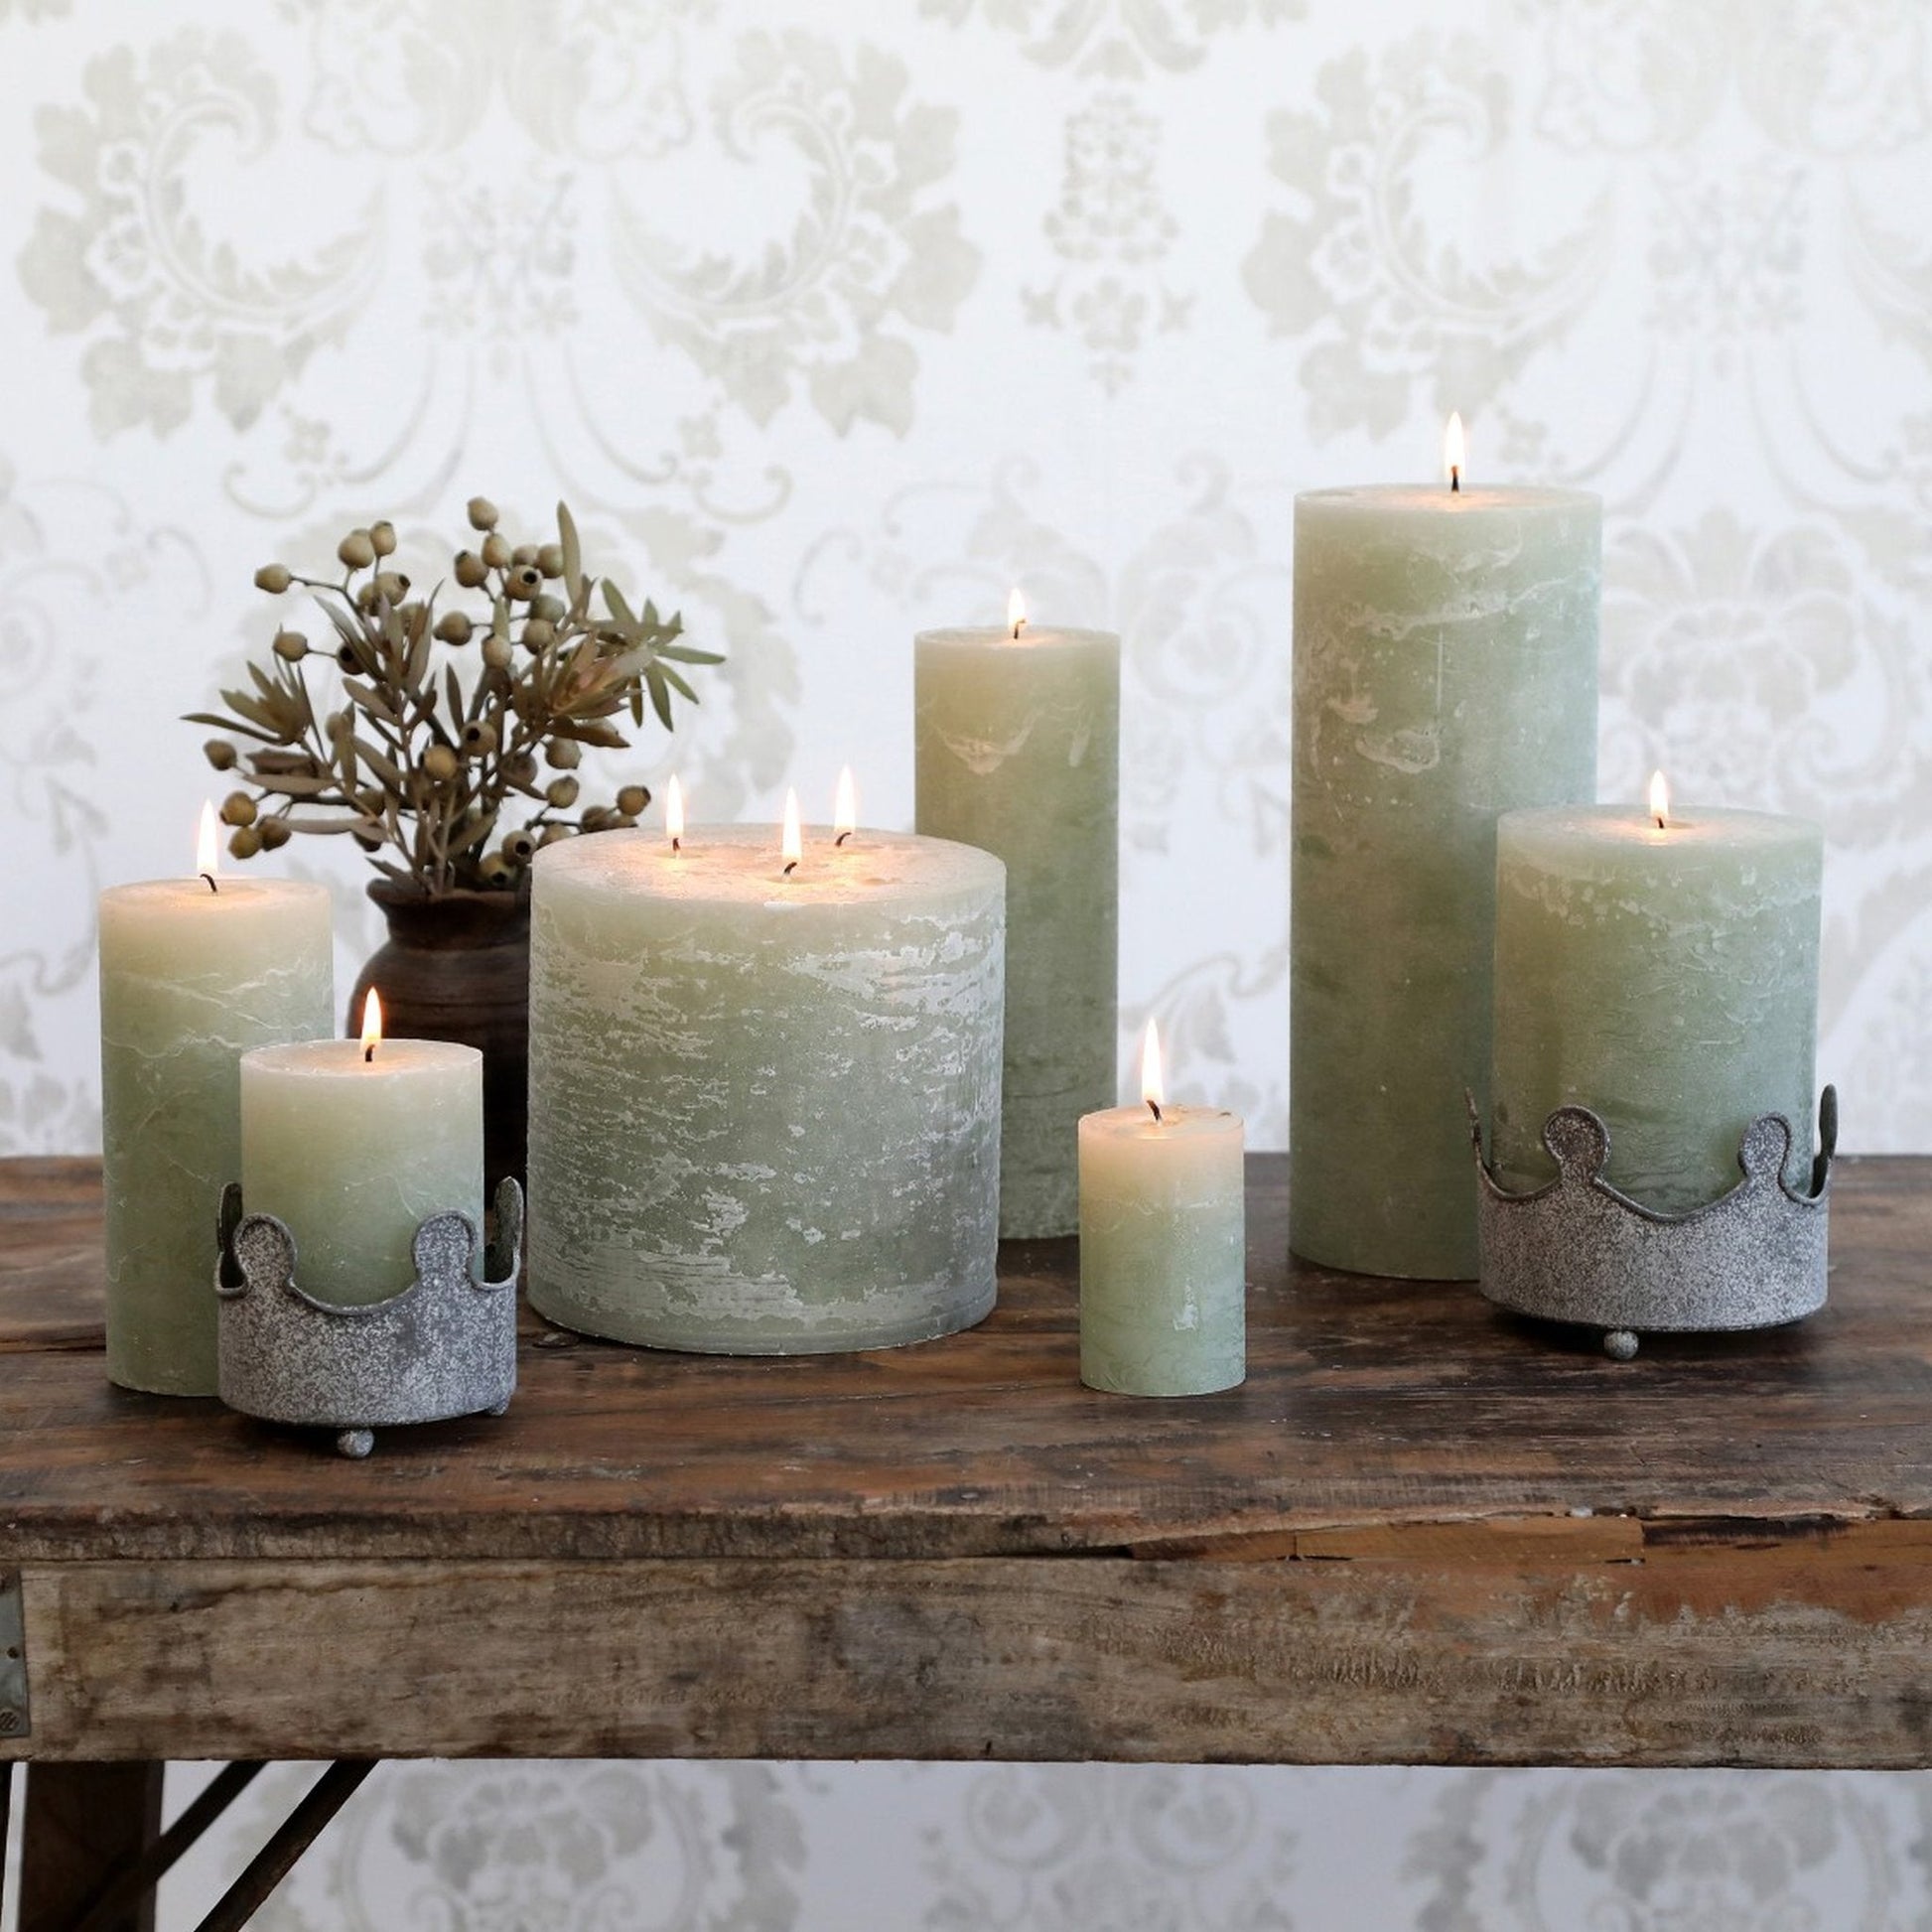 Verte Rustic Pillar Candle 210 hours - Bumble Living